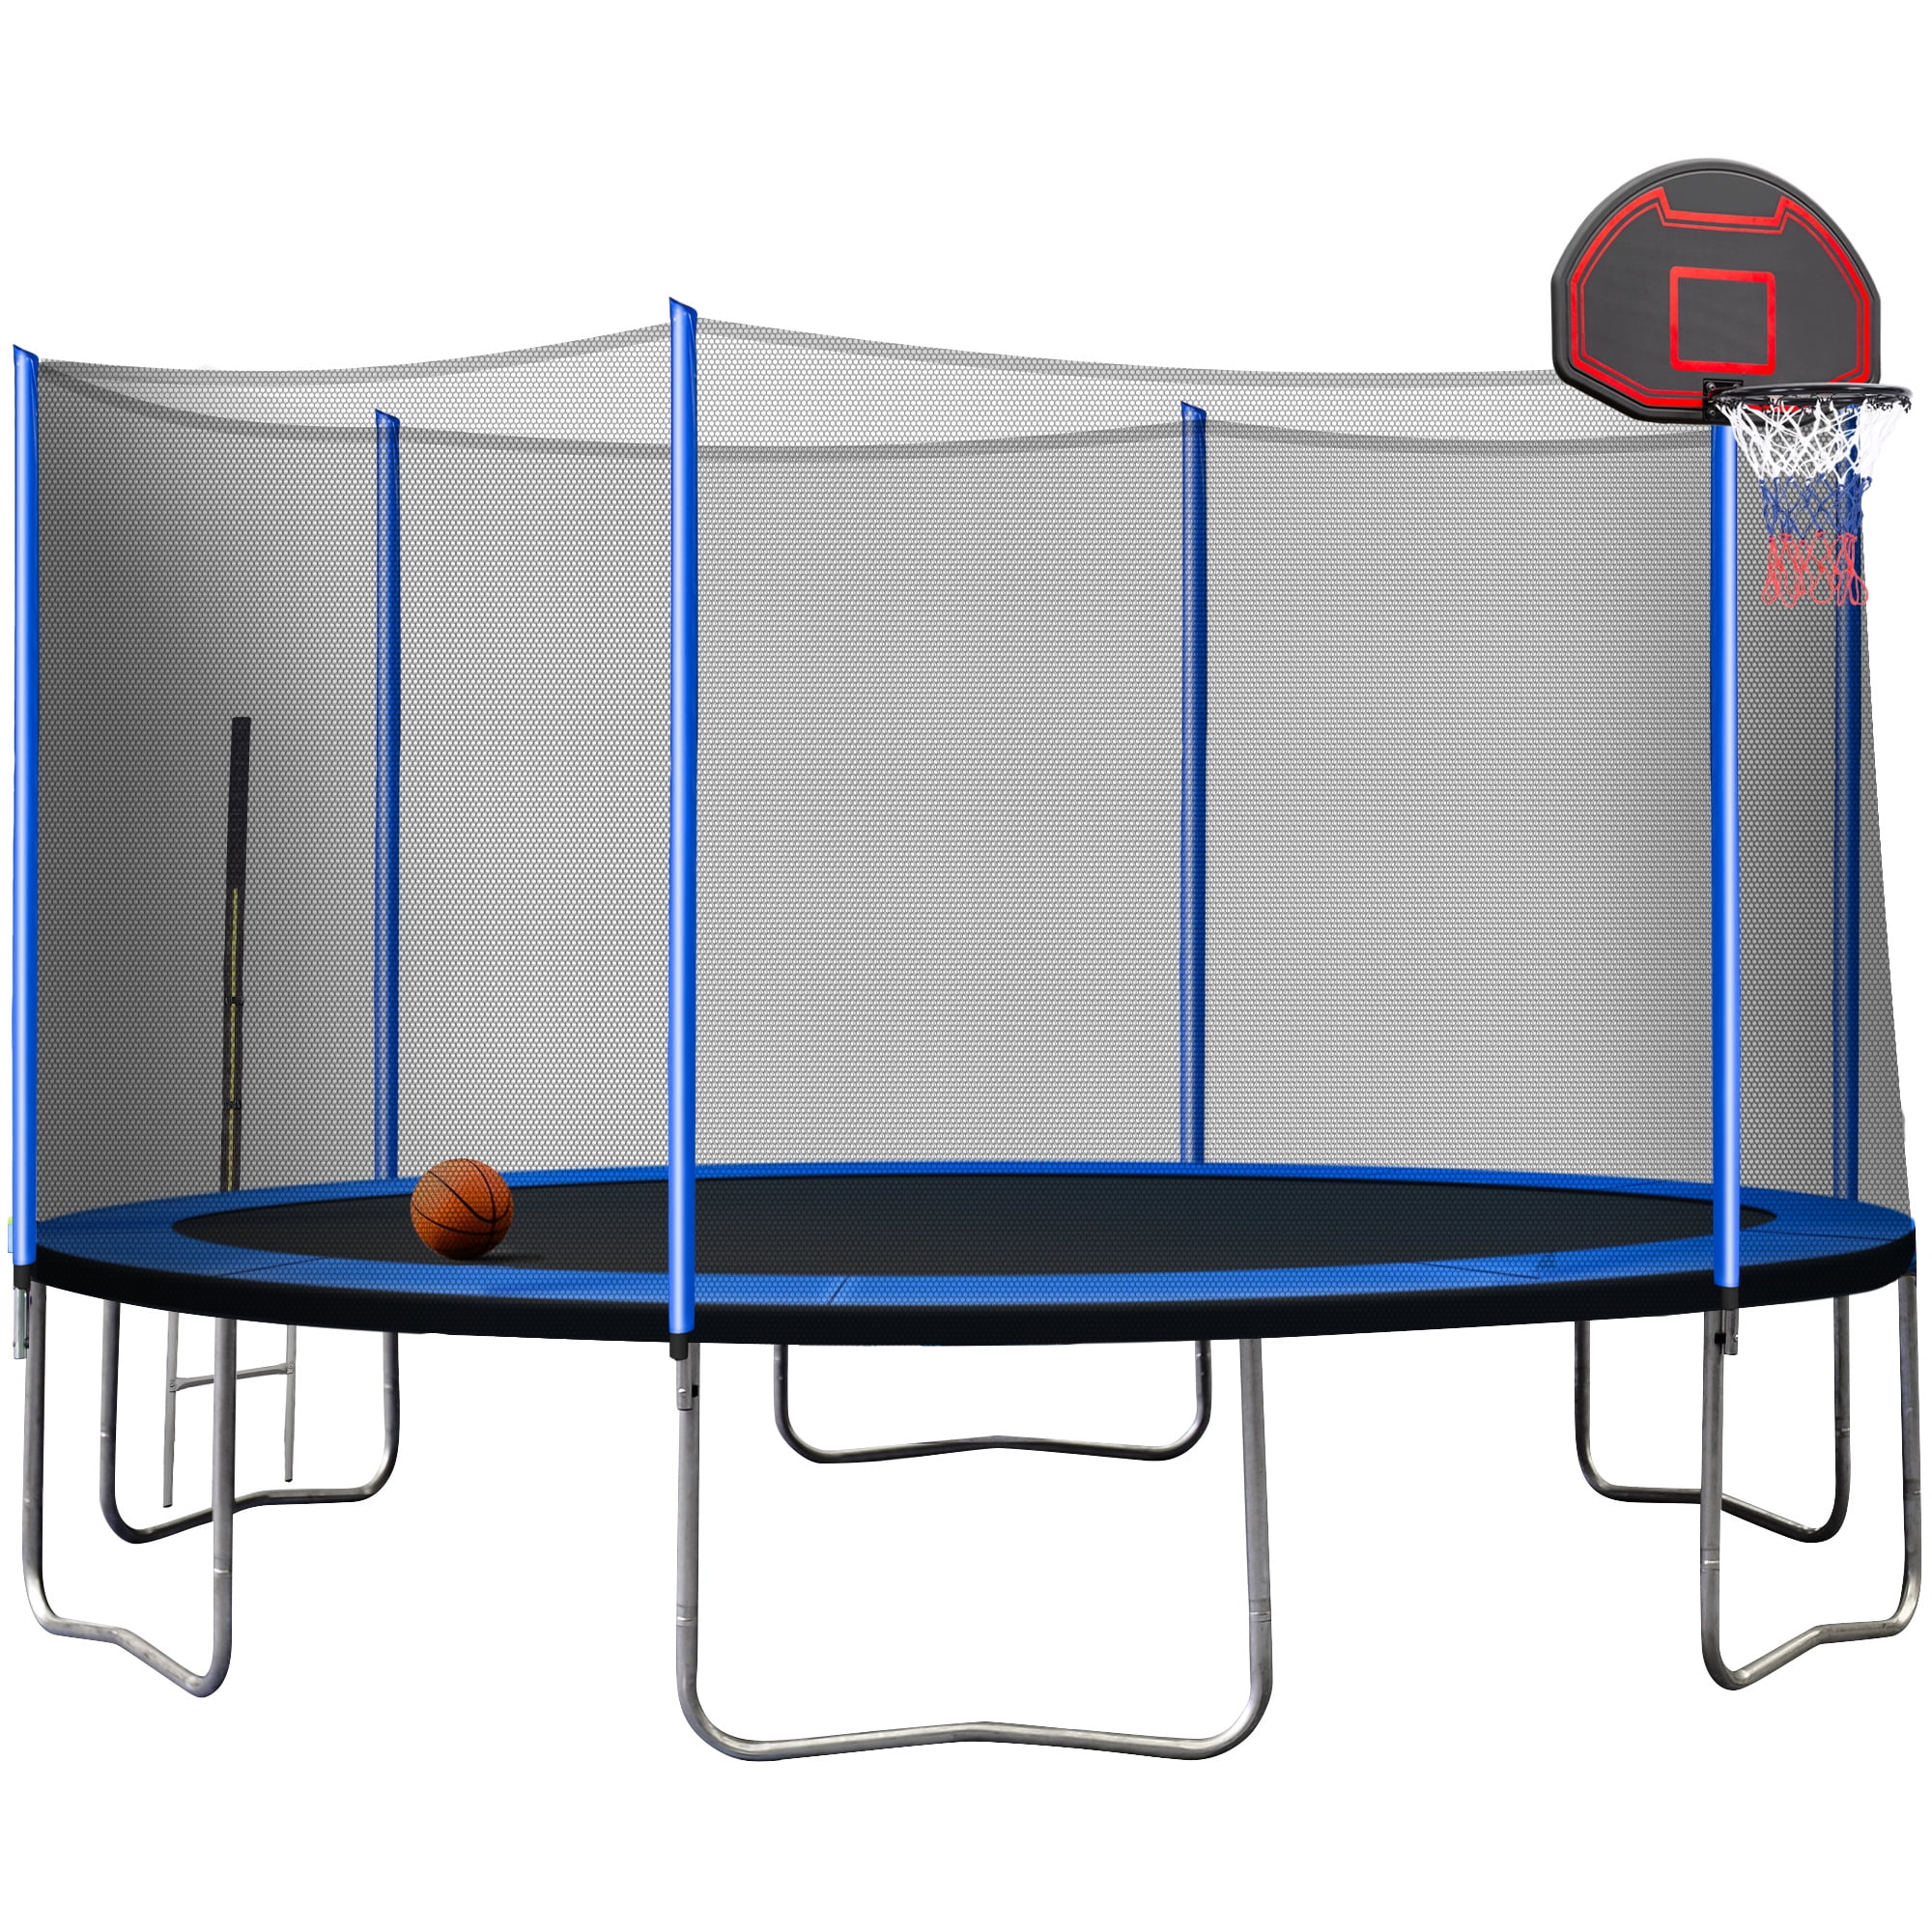 GoolRC 14FT Powder-coated Advanced Trampoline with Basketball Hoop Inflator and Ladder(Outer Safety Enclosure) Blue